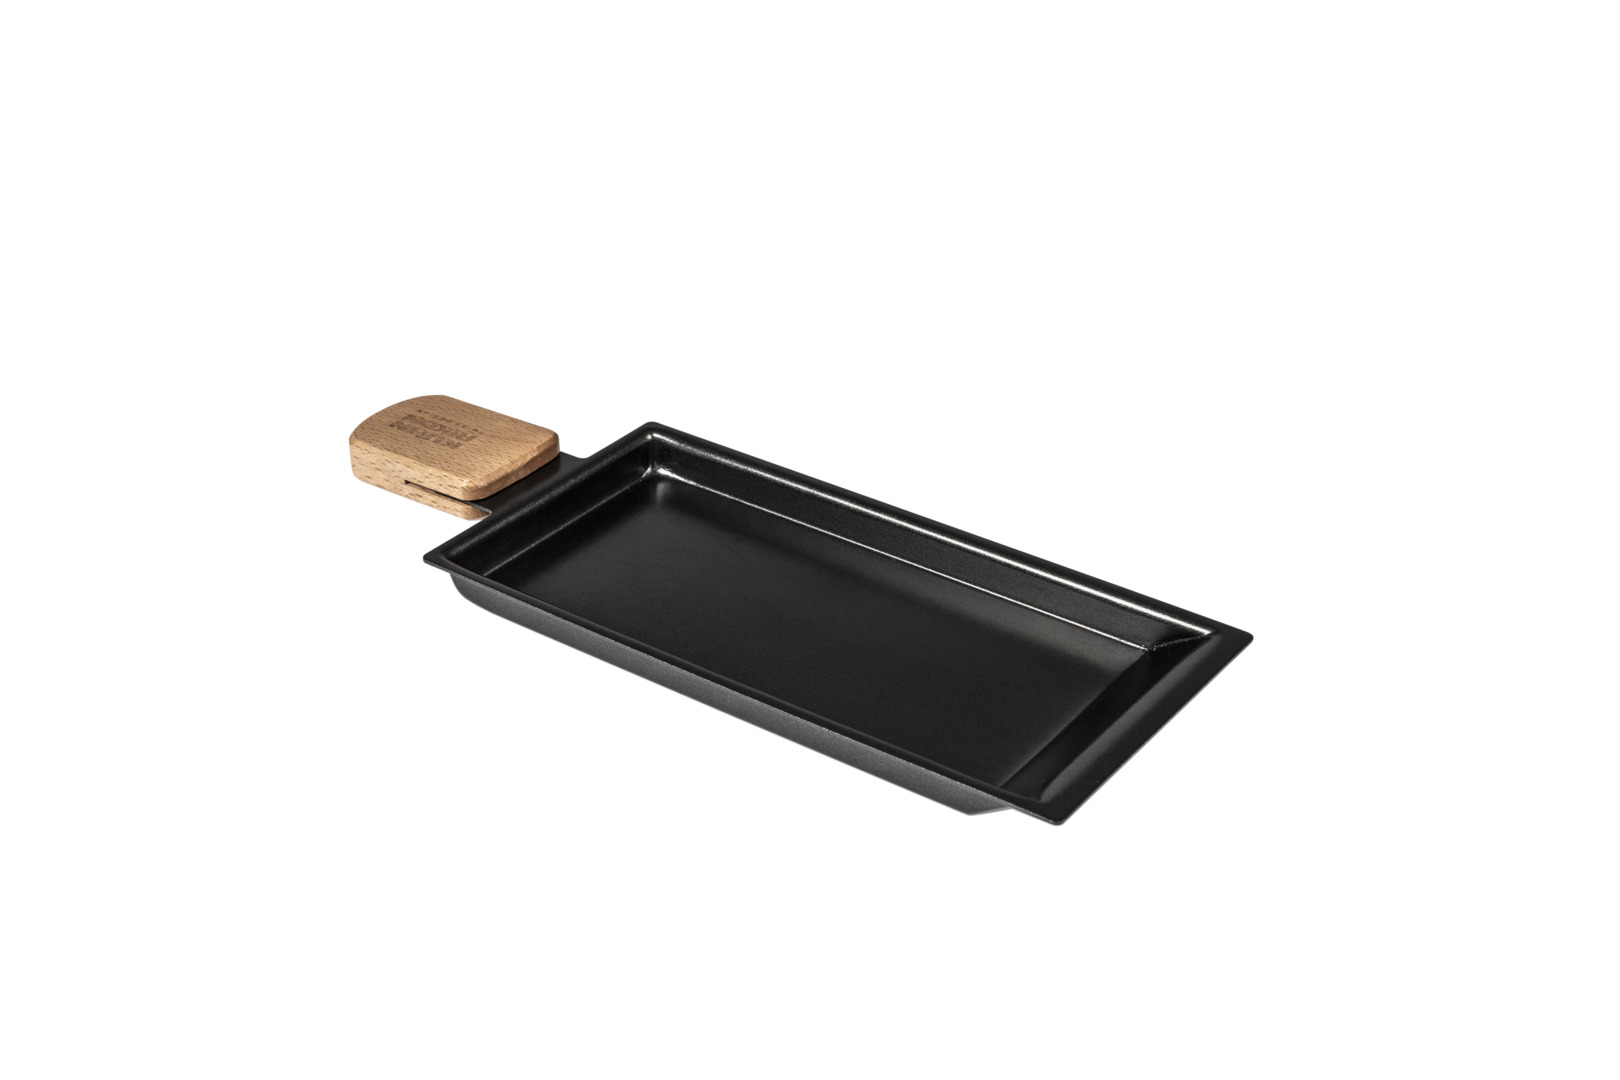 Kuhn Rikon - Raclette Pan with wooden handle